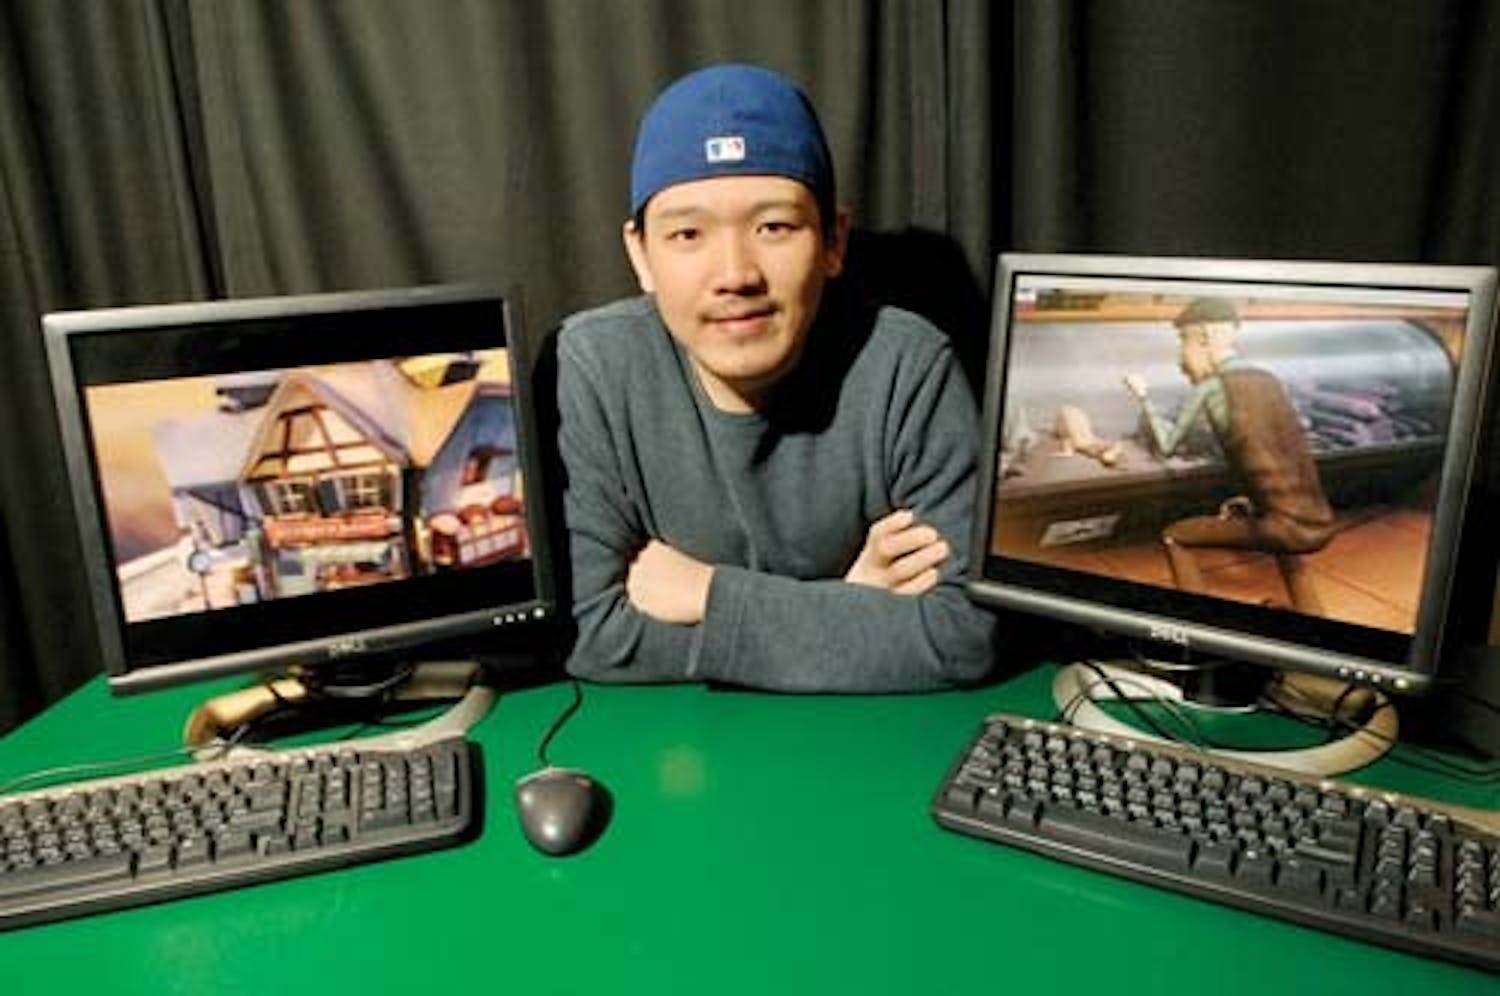 COURTESY OF INDIANA UNIVERSITY
IUPUI graduate student Frank Tai was recently selected by Pixar Animiaton Studios to join the studio's animation team. Tai's first major project with Pixar will be work on the movie Toy Story 3.